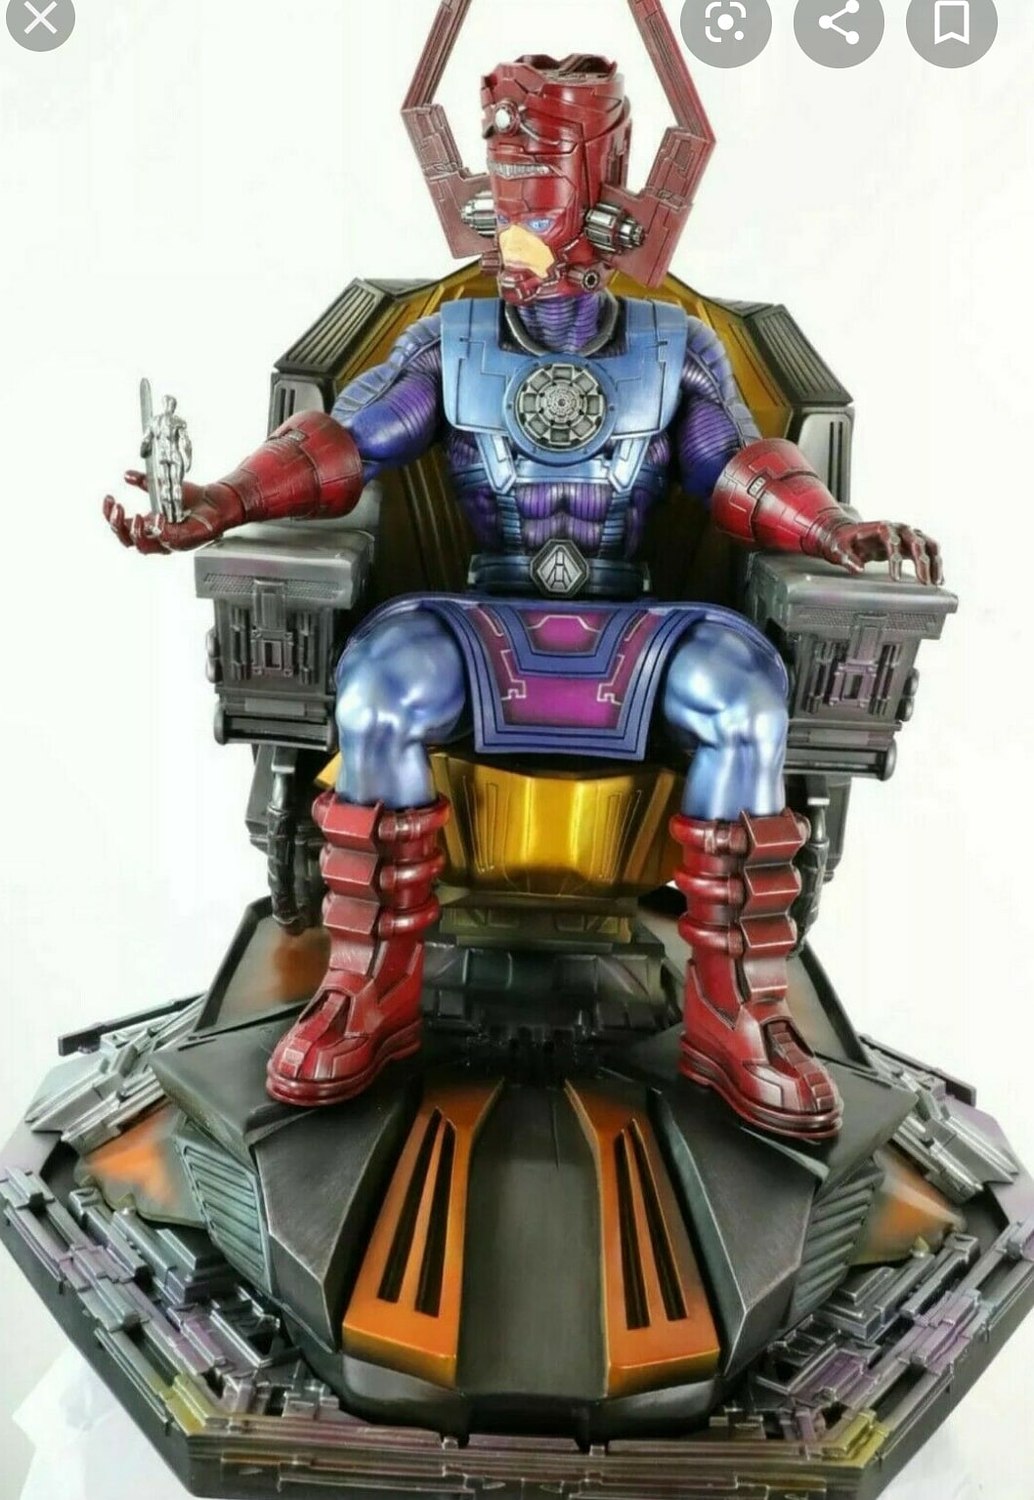 Galactus on Throne from Marvel